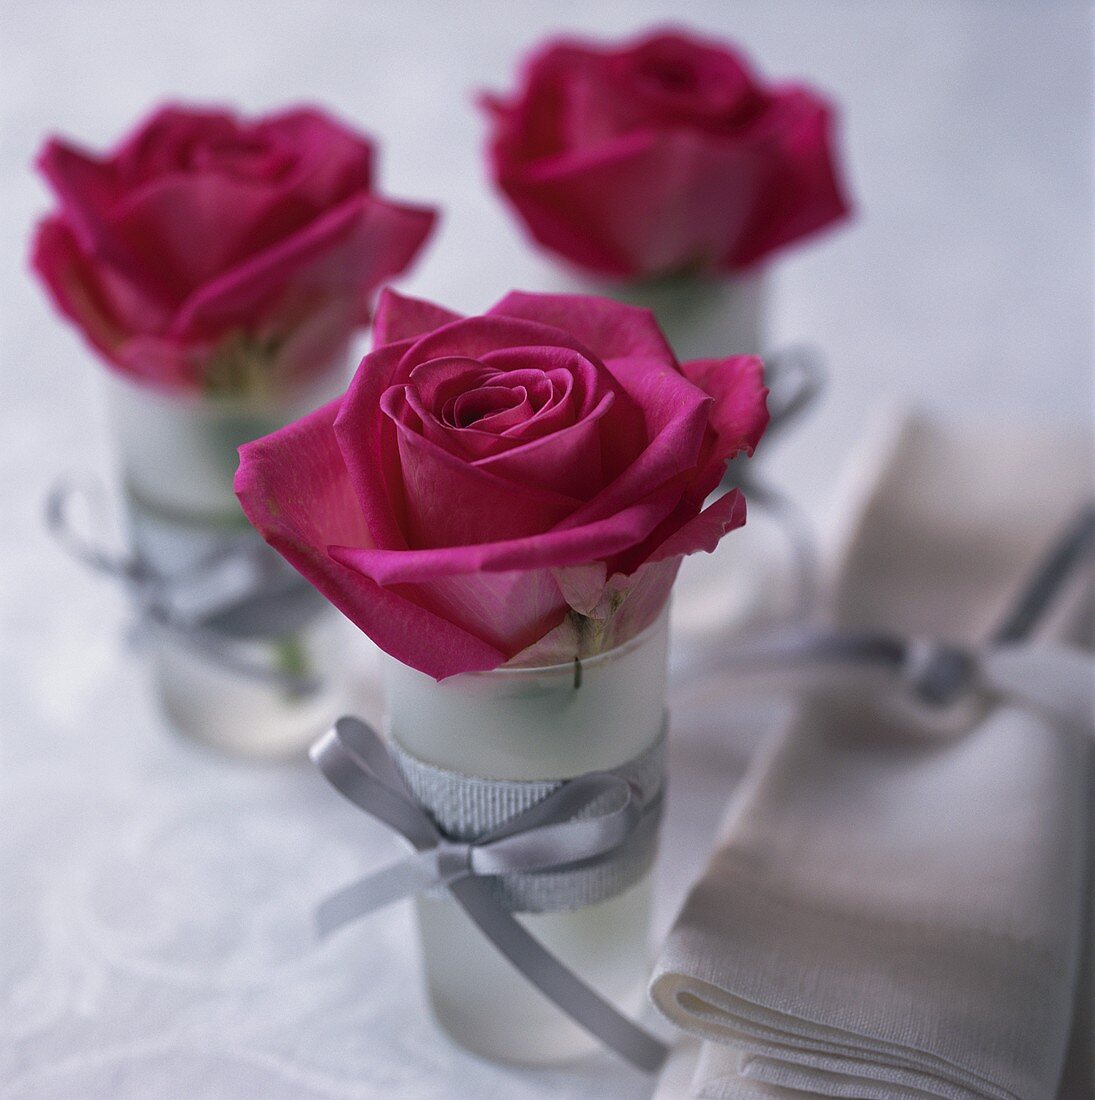 Table decoration of red roses in glasses